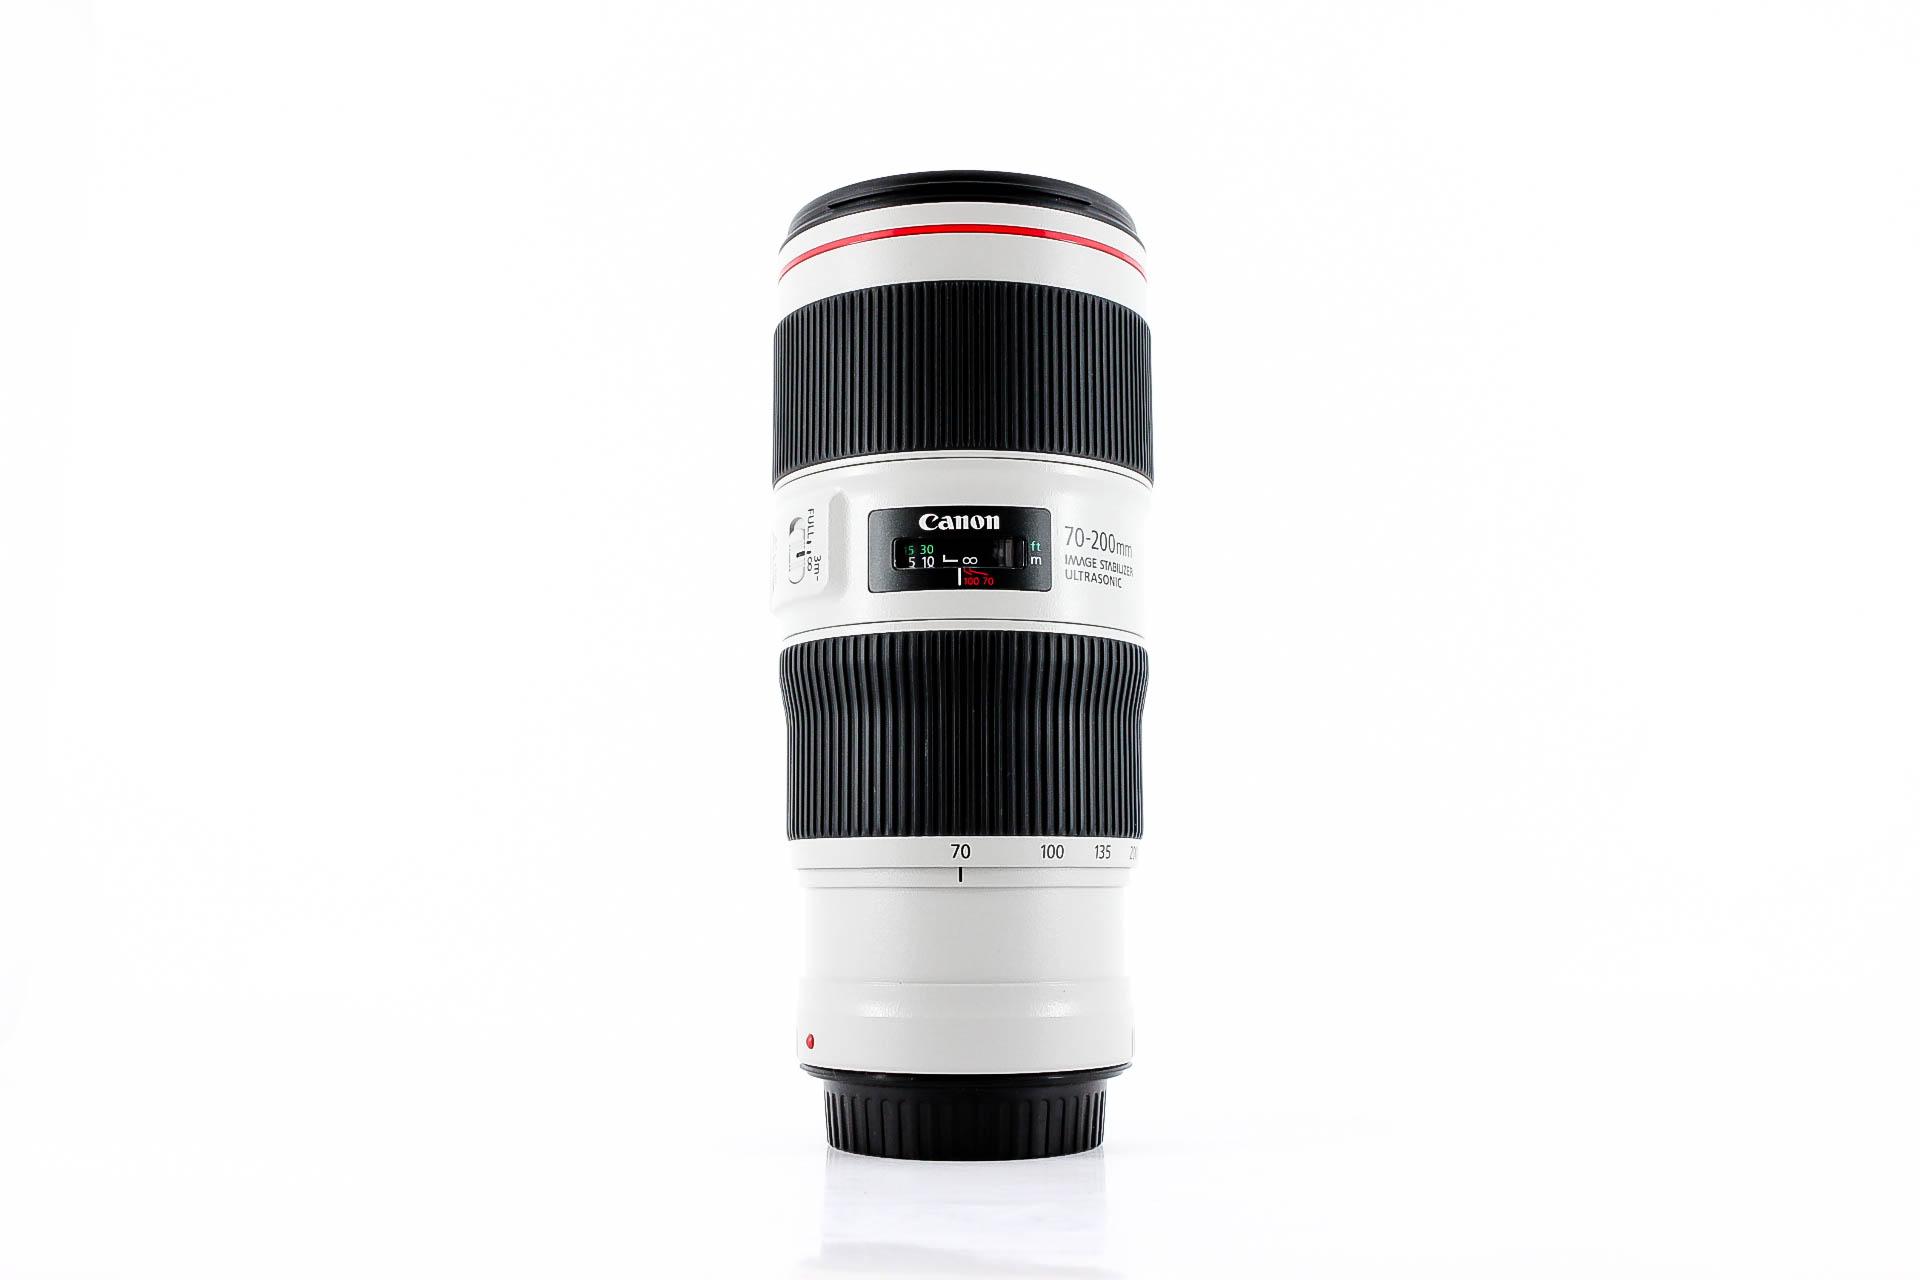 Canon 70-200mm L IS III USM f/2.8